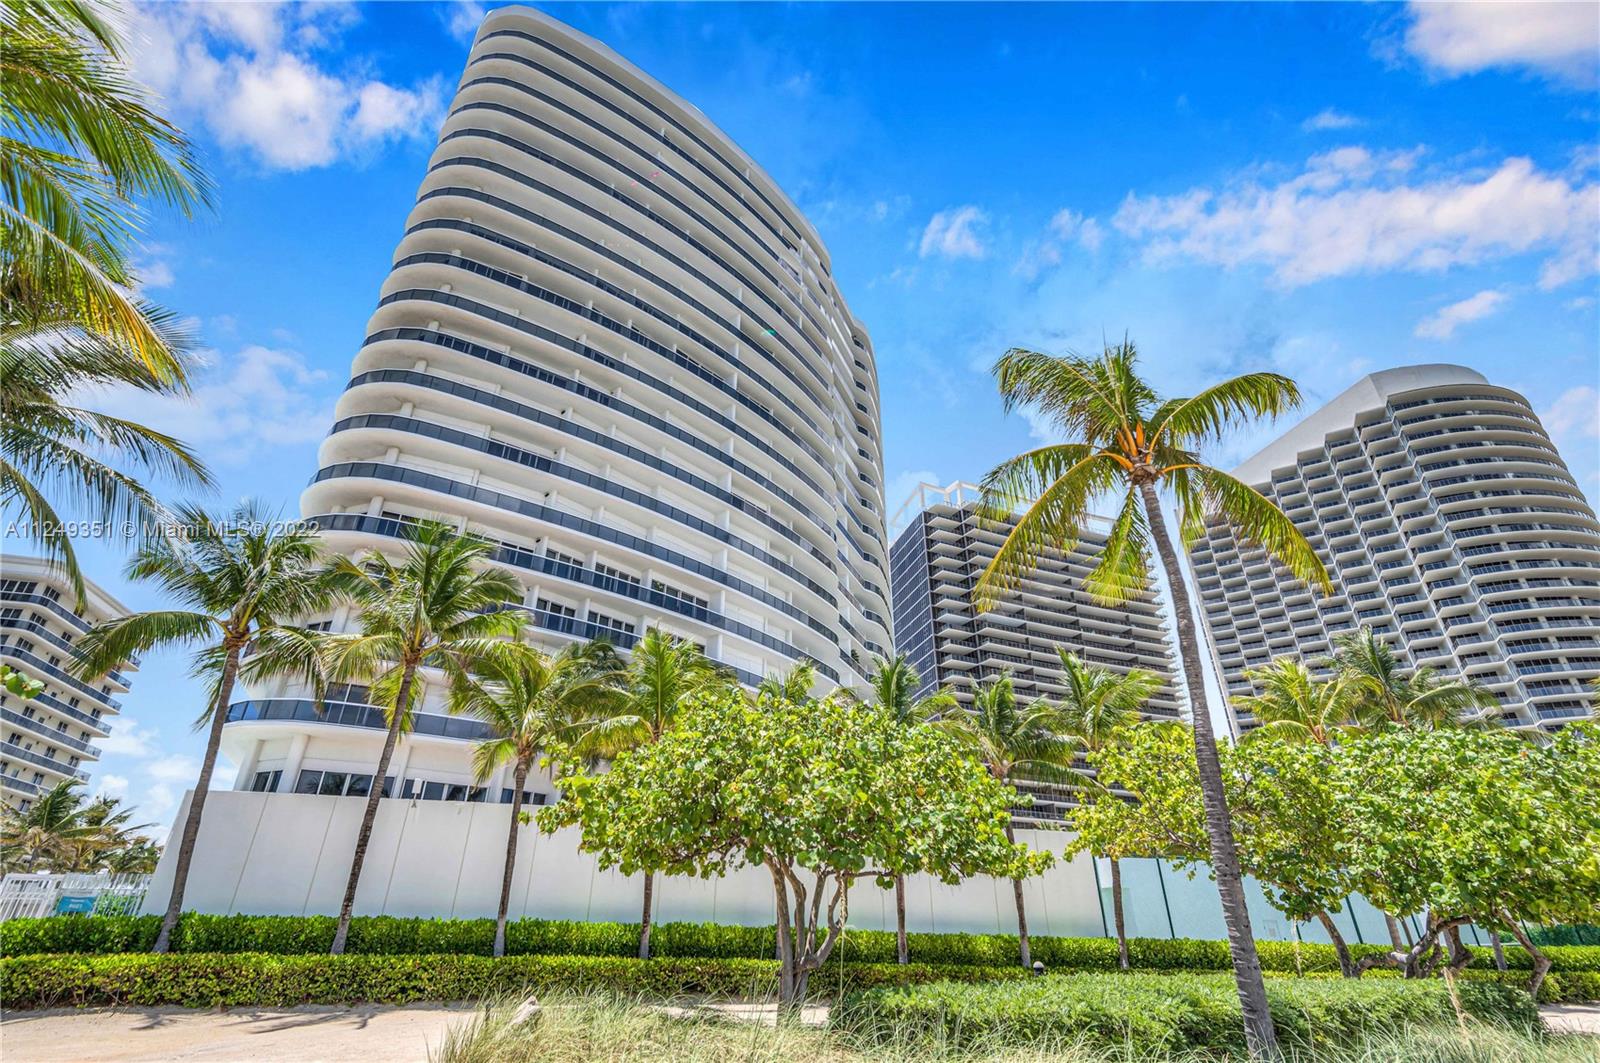 Photo 1 of Majestic Tower Apt 1102 in Bal Harbour - MLS A11249351